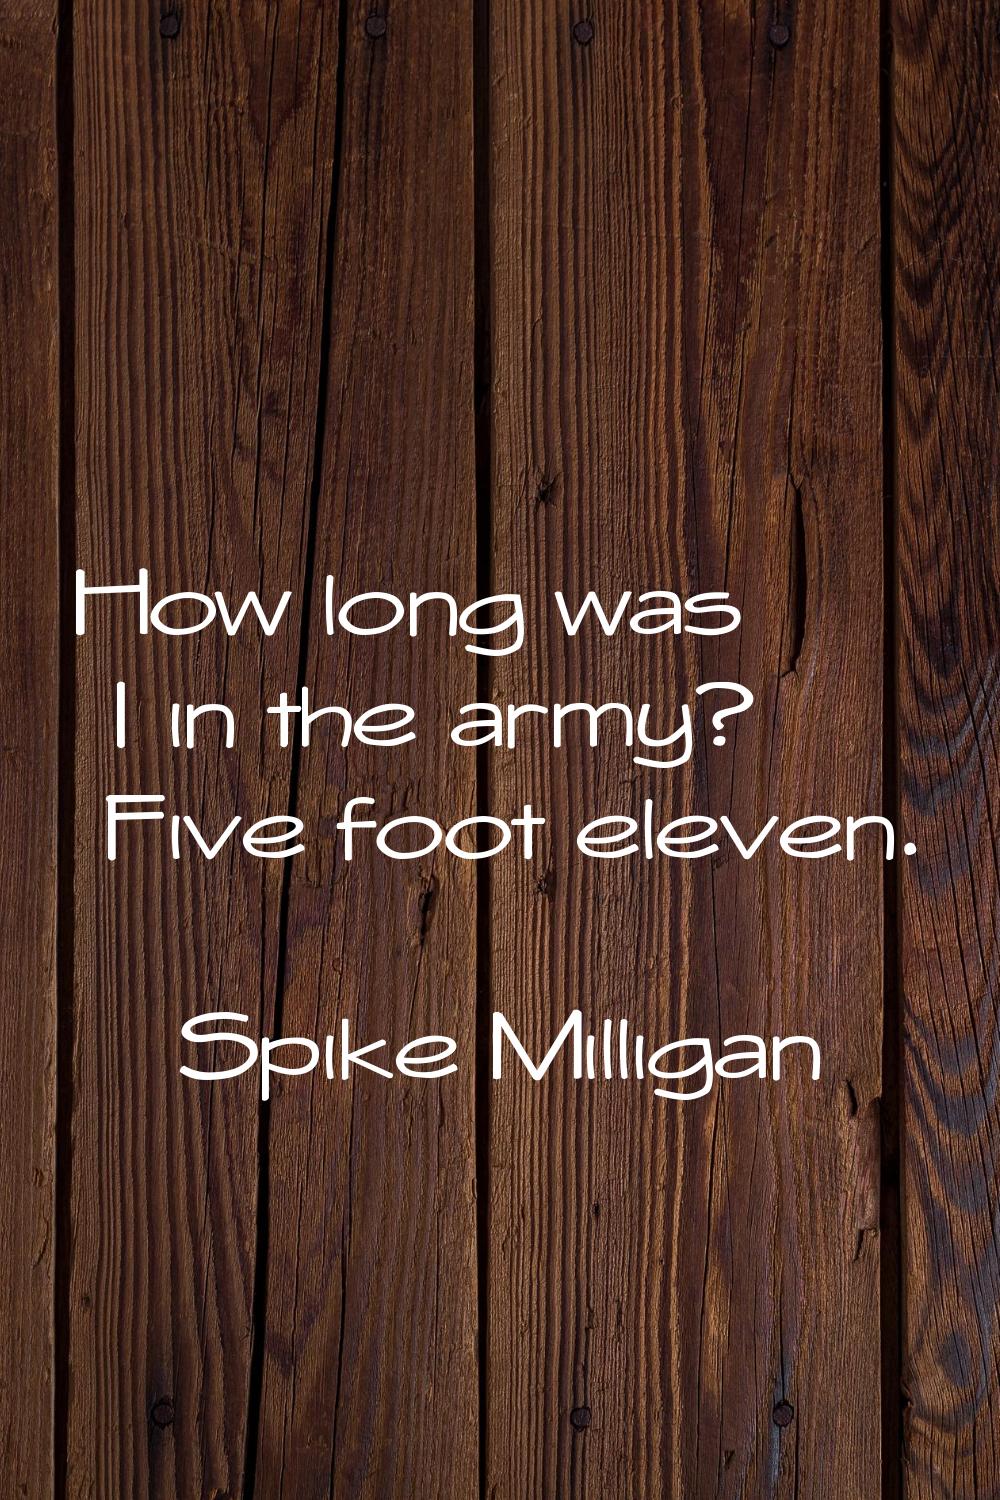 How long was I in the army? Five foot eleven.